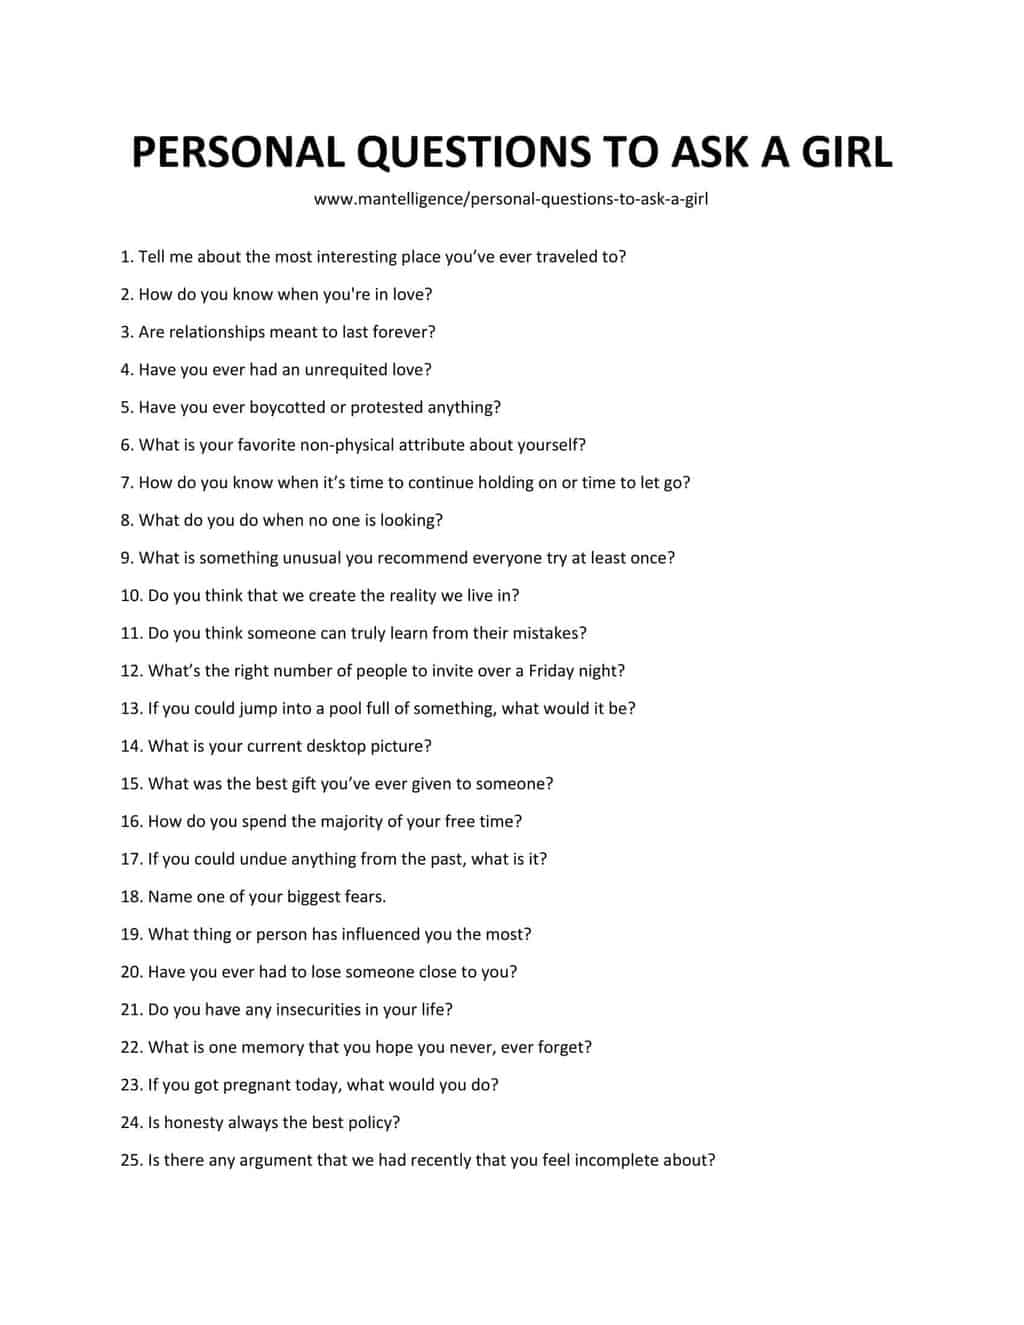 List of Personal Questions to Ask a Girl